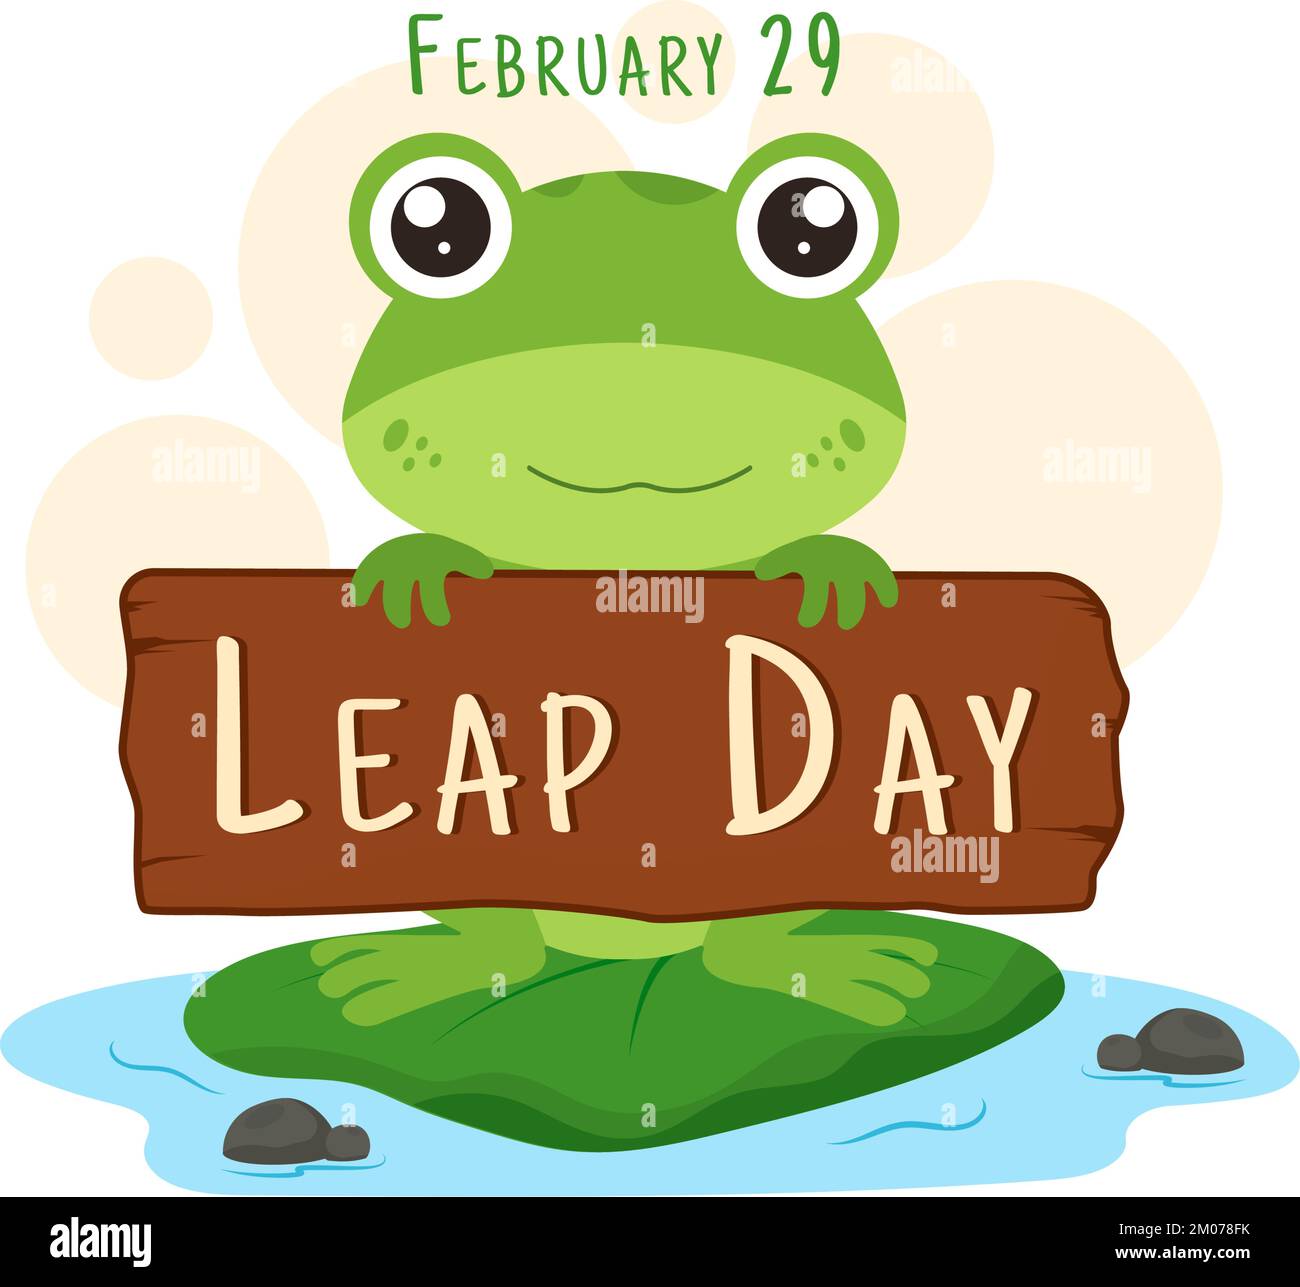 Happy Leap Day on 29 February with Cute Frog in Flat Style Cartoon Hand